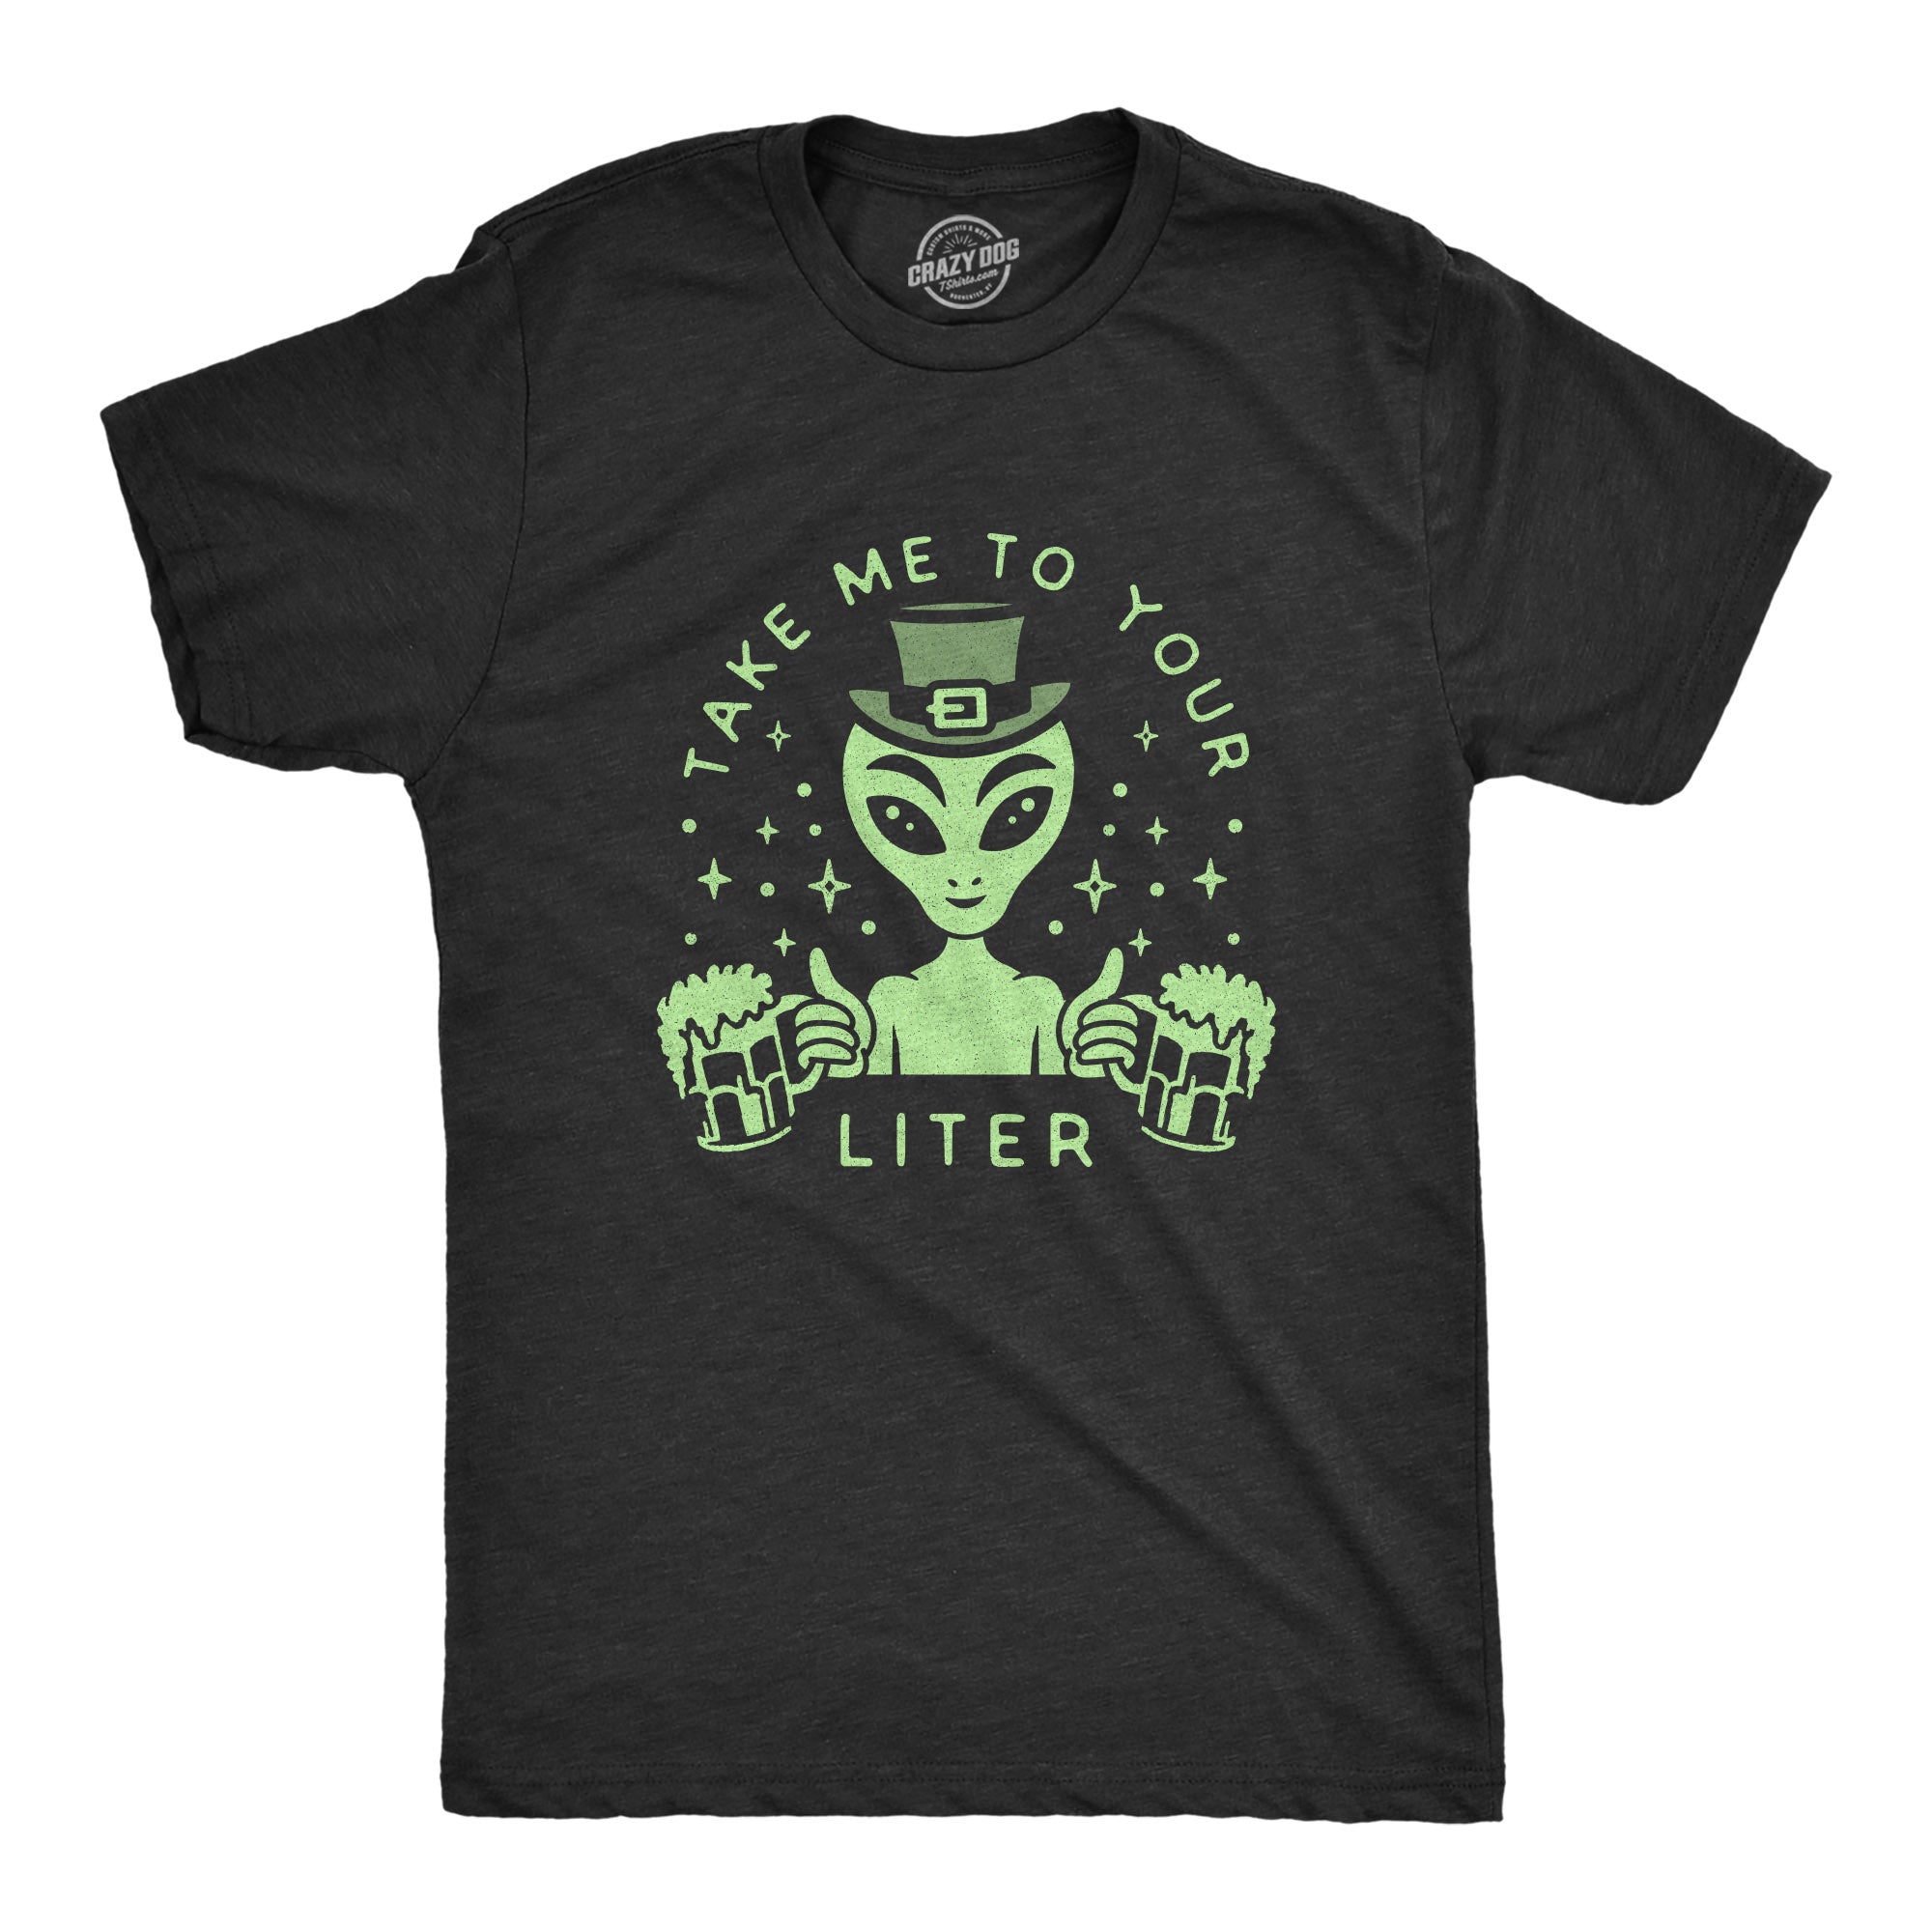 Funny Heather Black Take Me To Your Liter Mens T Shirt Nerdy Saint Patrick's Day 420 Tee